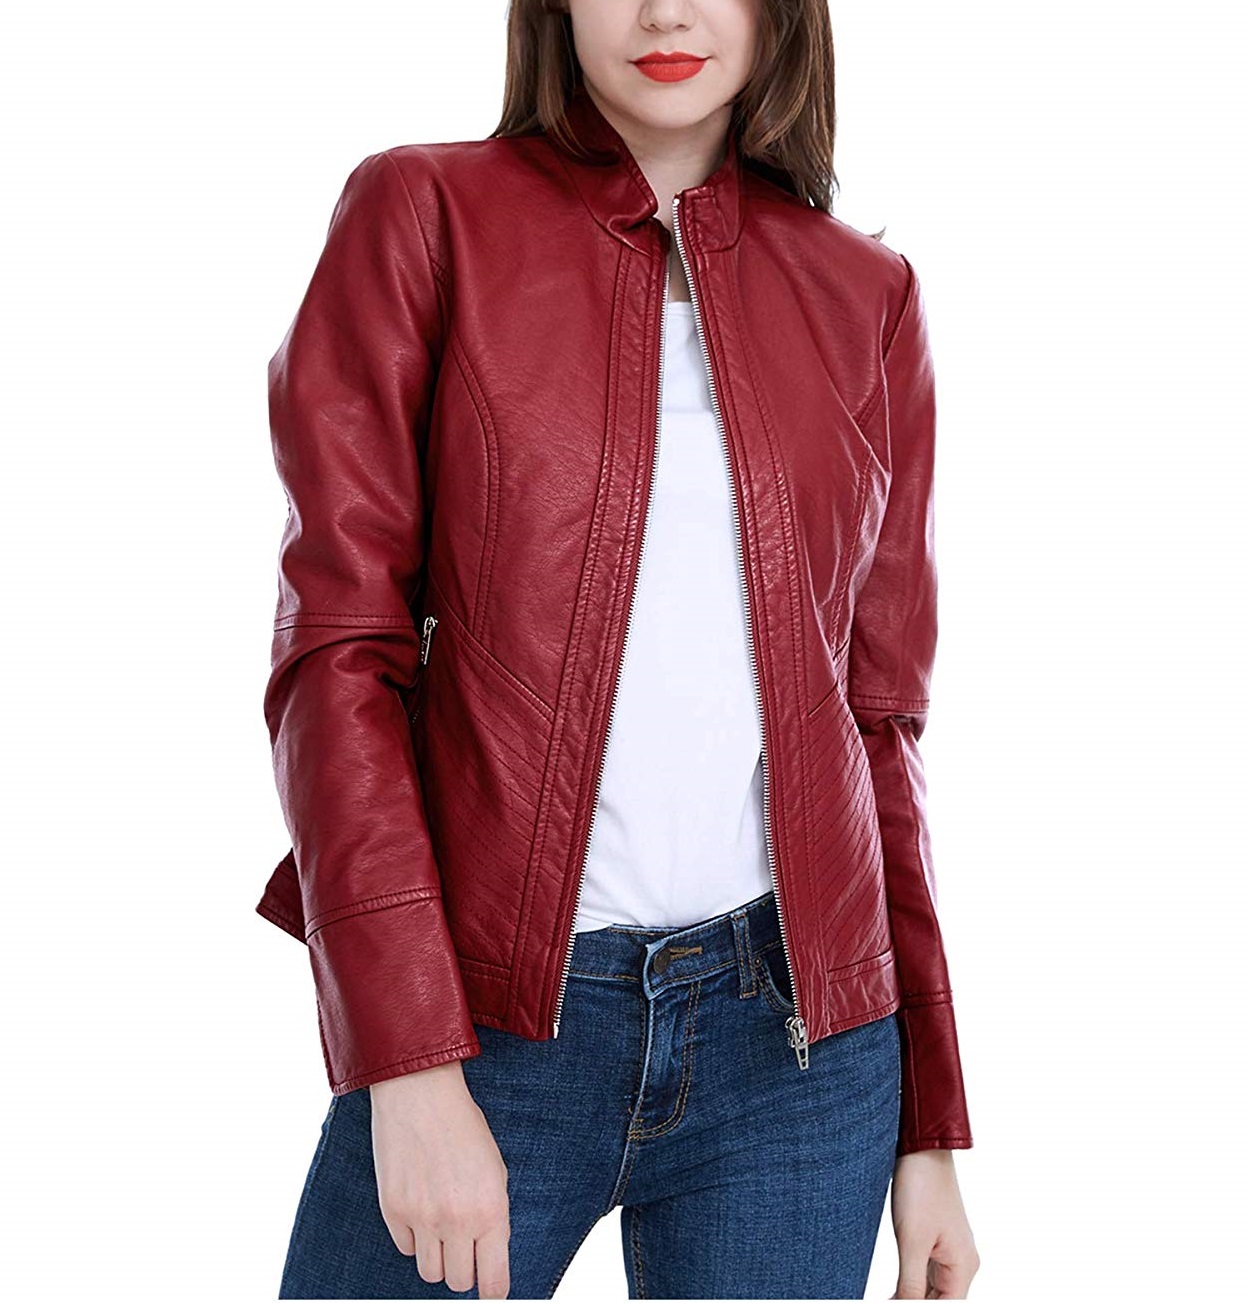 Fashion Jackets: Essential for Every Fashionista - Maker of Jacket